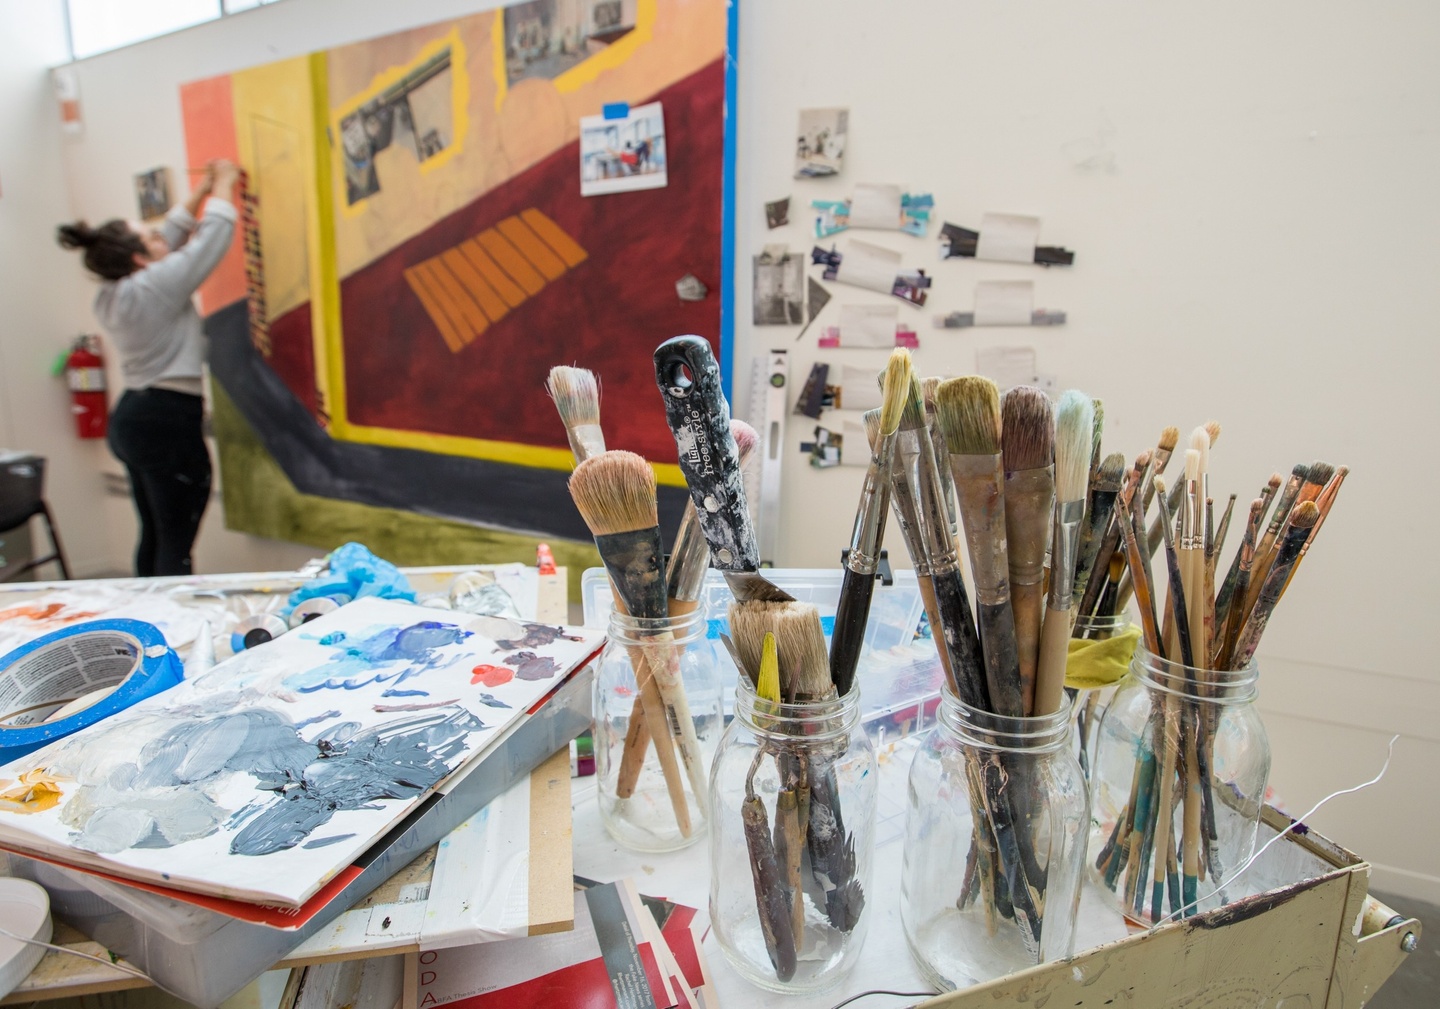 Artful shot of jars of brushes on a table next to a student working on a large-scale painting.